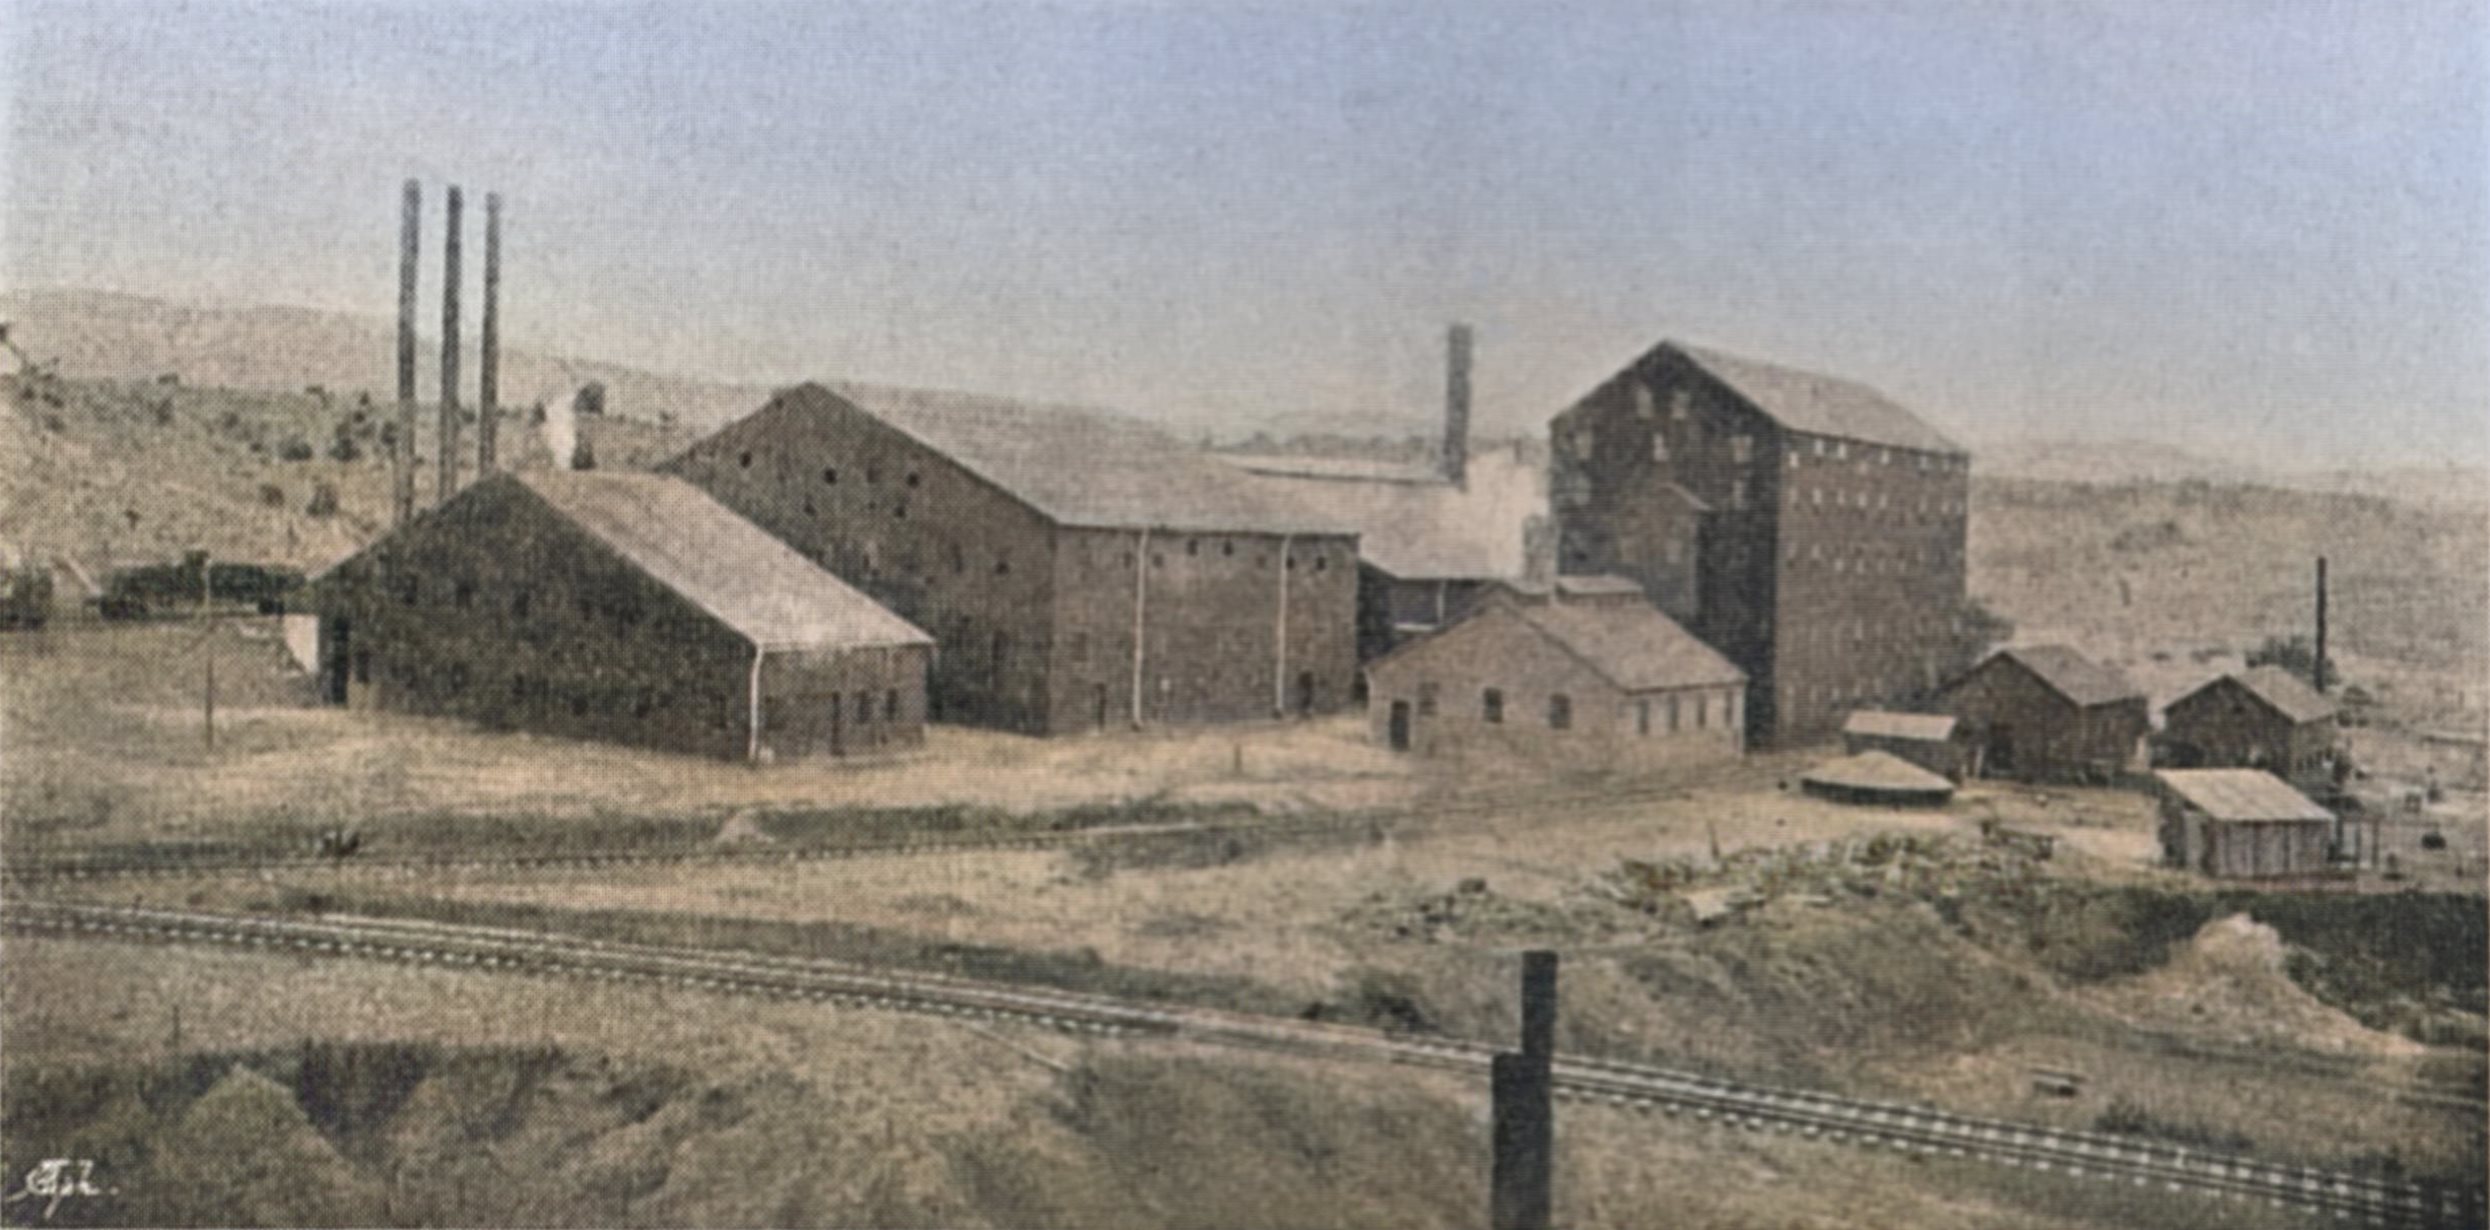 This sadly bad view of the El Paso Mill in Florence is one of very few known views of this mill that was located southeast of the town of Florence, and which was to treat gold ore from the Cripple Creek Mining District using the Chlorination Process.
   While this view appears in an August 1898 publication, I can use the only Sanborn Map that shows this mill, the January 1900 Sanborn Fire Insurance Map, to see that the direction of the view is looking southwest. The railroad line in foreground is dual gauge and is the main track for the branch line that served this and a second chlorination mill, in addition to a smelter. I think the outbound track is the spur that goes back to the high narrow structure that Sanborn call the Chlorination Building. The Inbound track is partly seen at left edge about middle top/down, where an oil tank car is seen. On the hill behind that car, outside the view at left, there was an oil-tank according to the Sanborn map, and text in the article where this image appeared.
   Building where the 3-smokestacks appears at left are the Power Plant House for most part, and then the large high one is the Crusher and Dryer structure, followed by a structure holding Bedding Floors, Roasters and Cooling area. The even higher, narrower structure more to the right is, as said, marked as being the Chlorination Building with a Belt House and Refinery more towards the photographer. Further right there is a Carpenter and Blacksmith shown as smaller structures, with a more shed like structure closer to the photographer. There is no trace of the Concentrator Building seen on the Sanborn which should been visible at the right-hand side, indicating it was a later construction then this 1898 source had.
   I did procure the colored version of this image. Source was gray-toned, or in common speech black & white. Used an online service and tweaked and worked with image to get what looks best to my eyes for the moment.